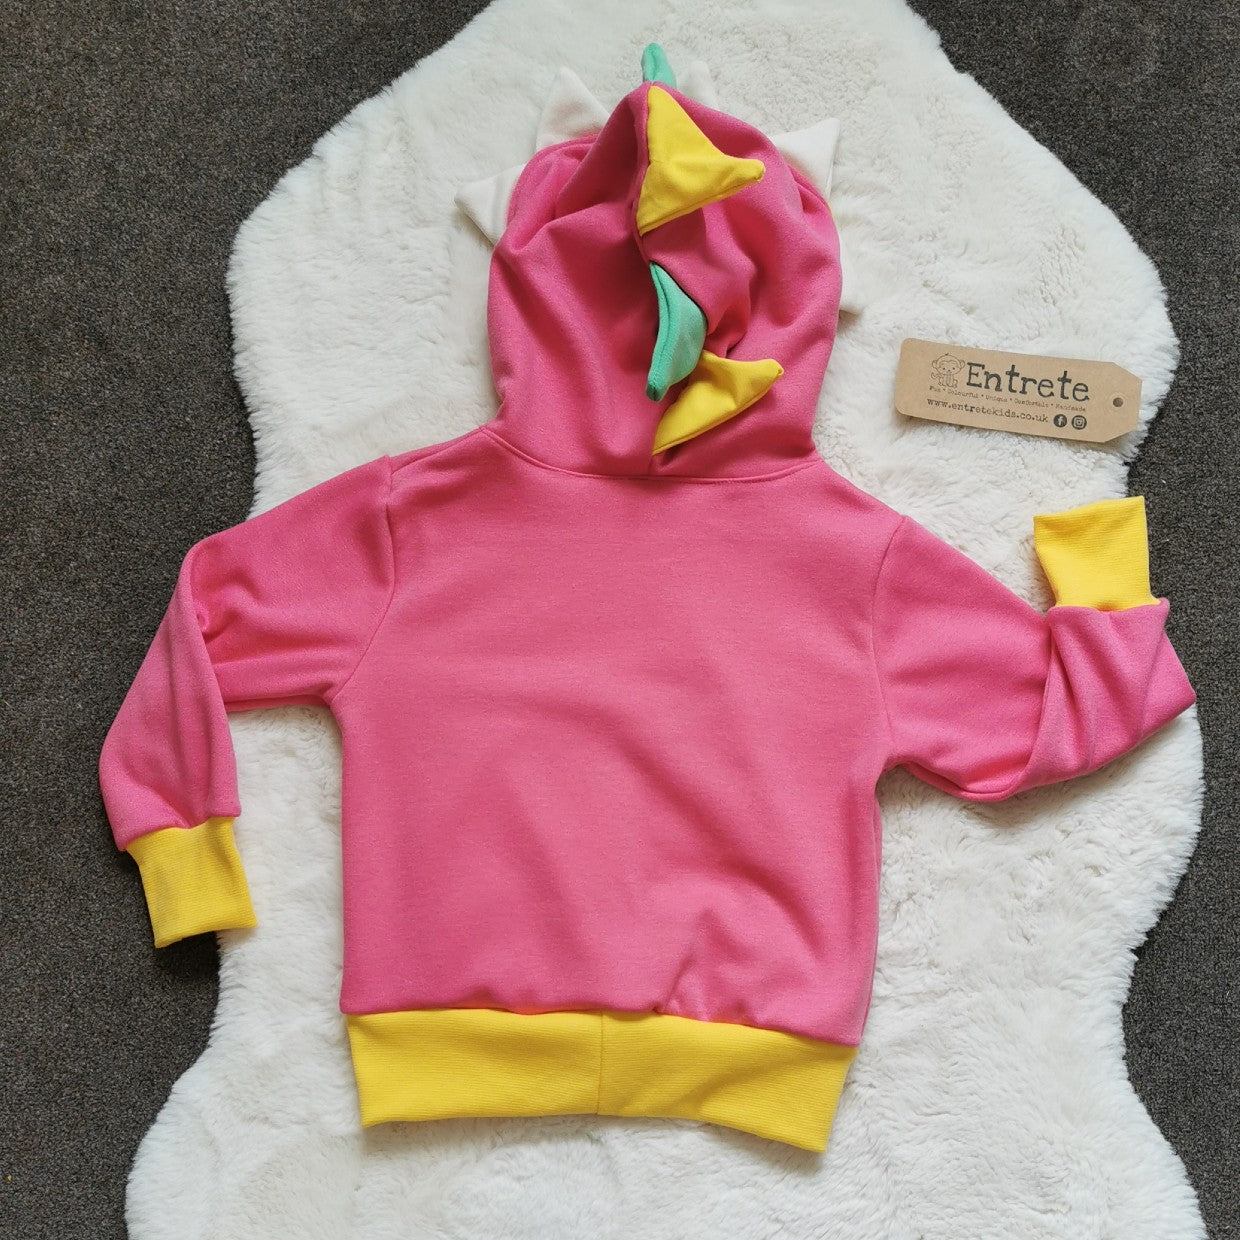 The pink dinosaur hoodie is packed full of colour and fun. Featuring a contrasting front pocket and dinosaur teeth and spikes on the hood. Handmade using pink, white and green cotton sweatshirt fleeces, with yellow cotton jersey and ribbing. Shown from the rear.